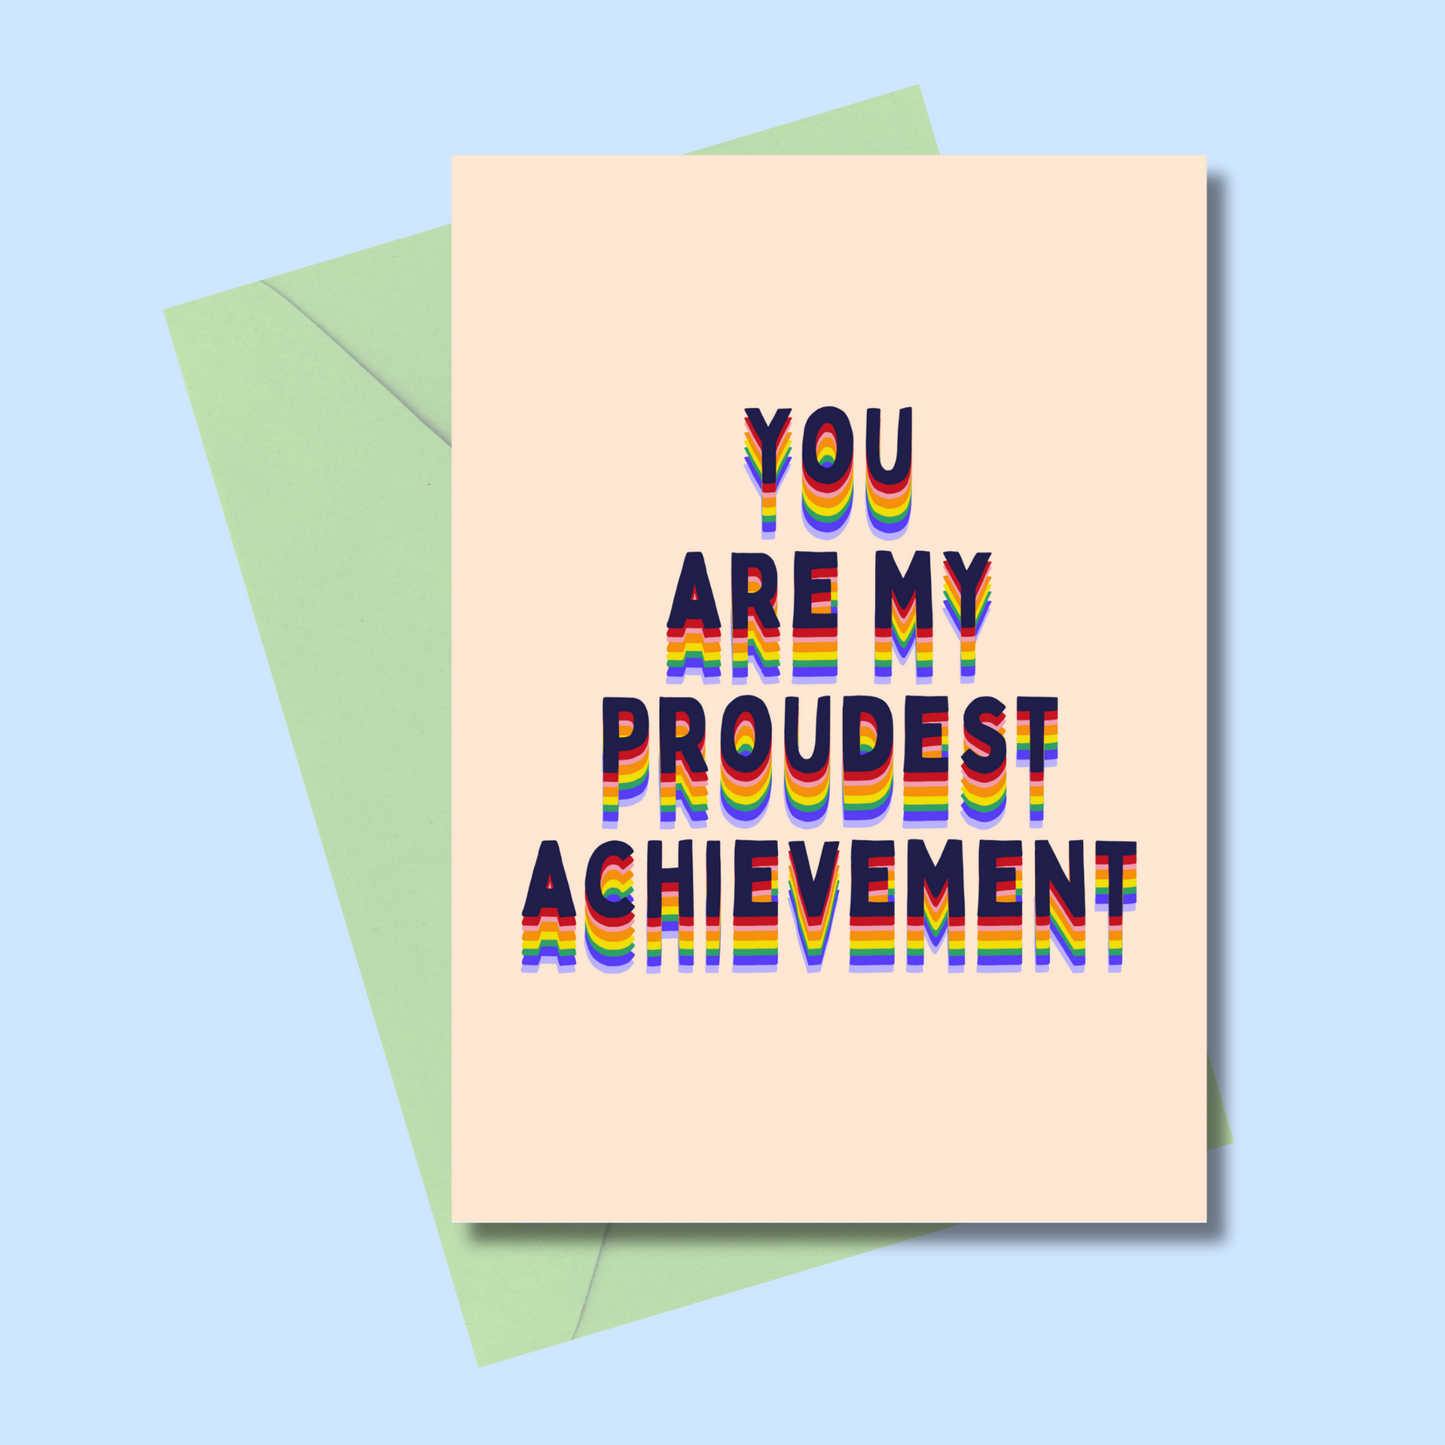 You are my proudest achievement (5x7” print/card)